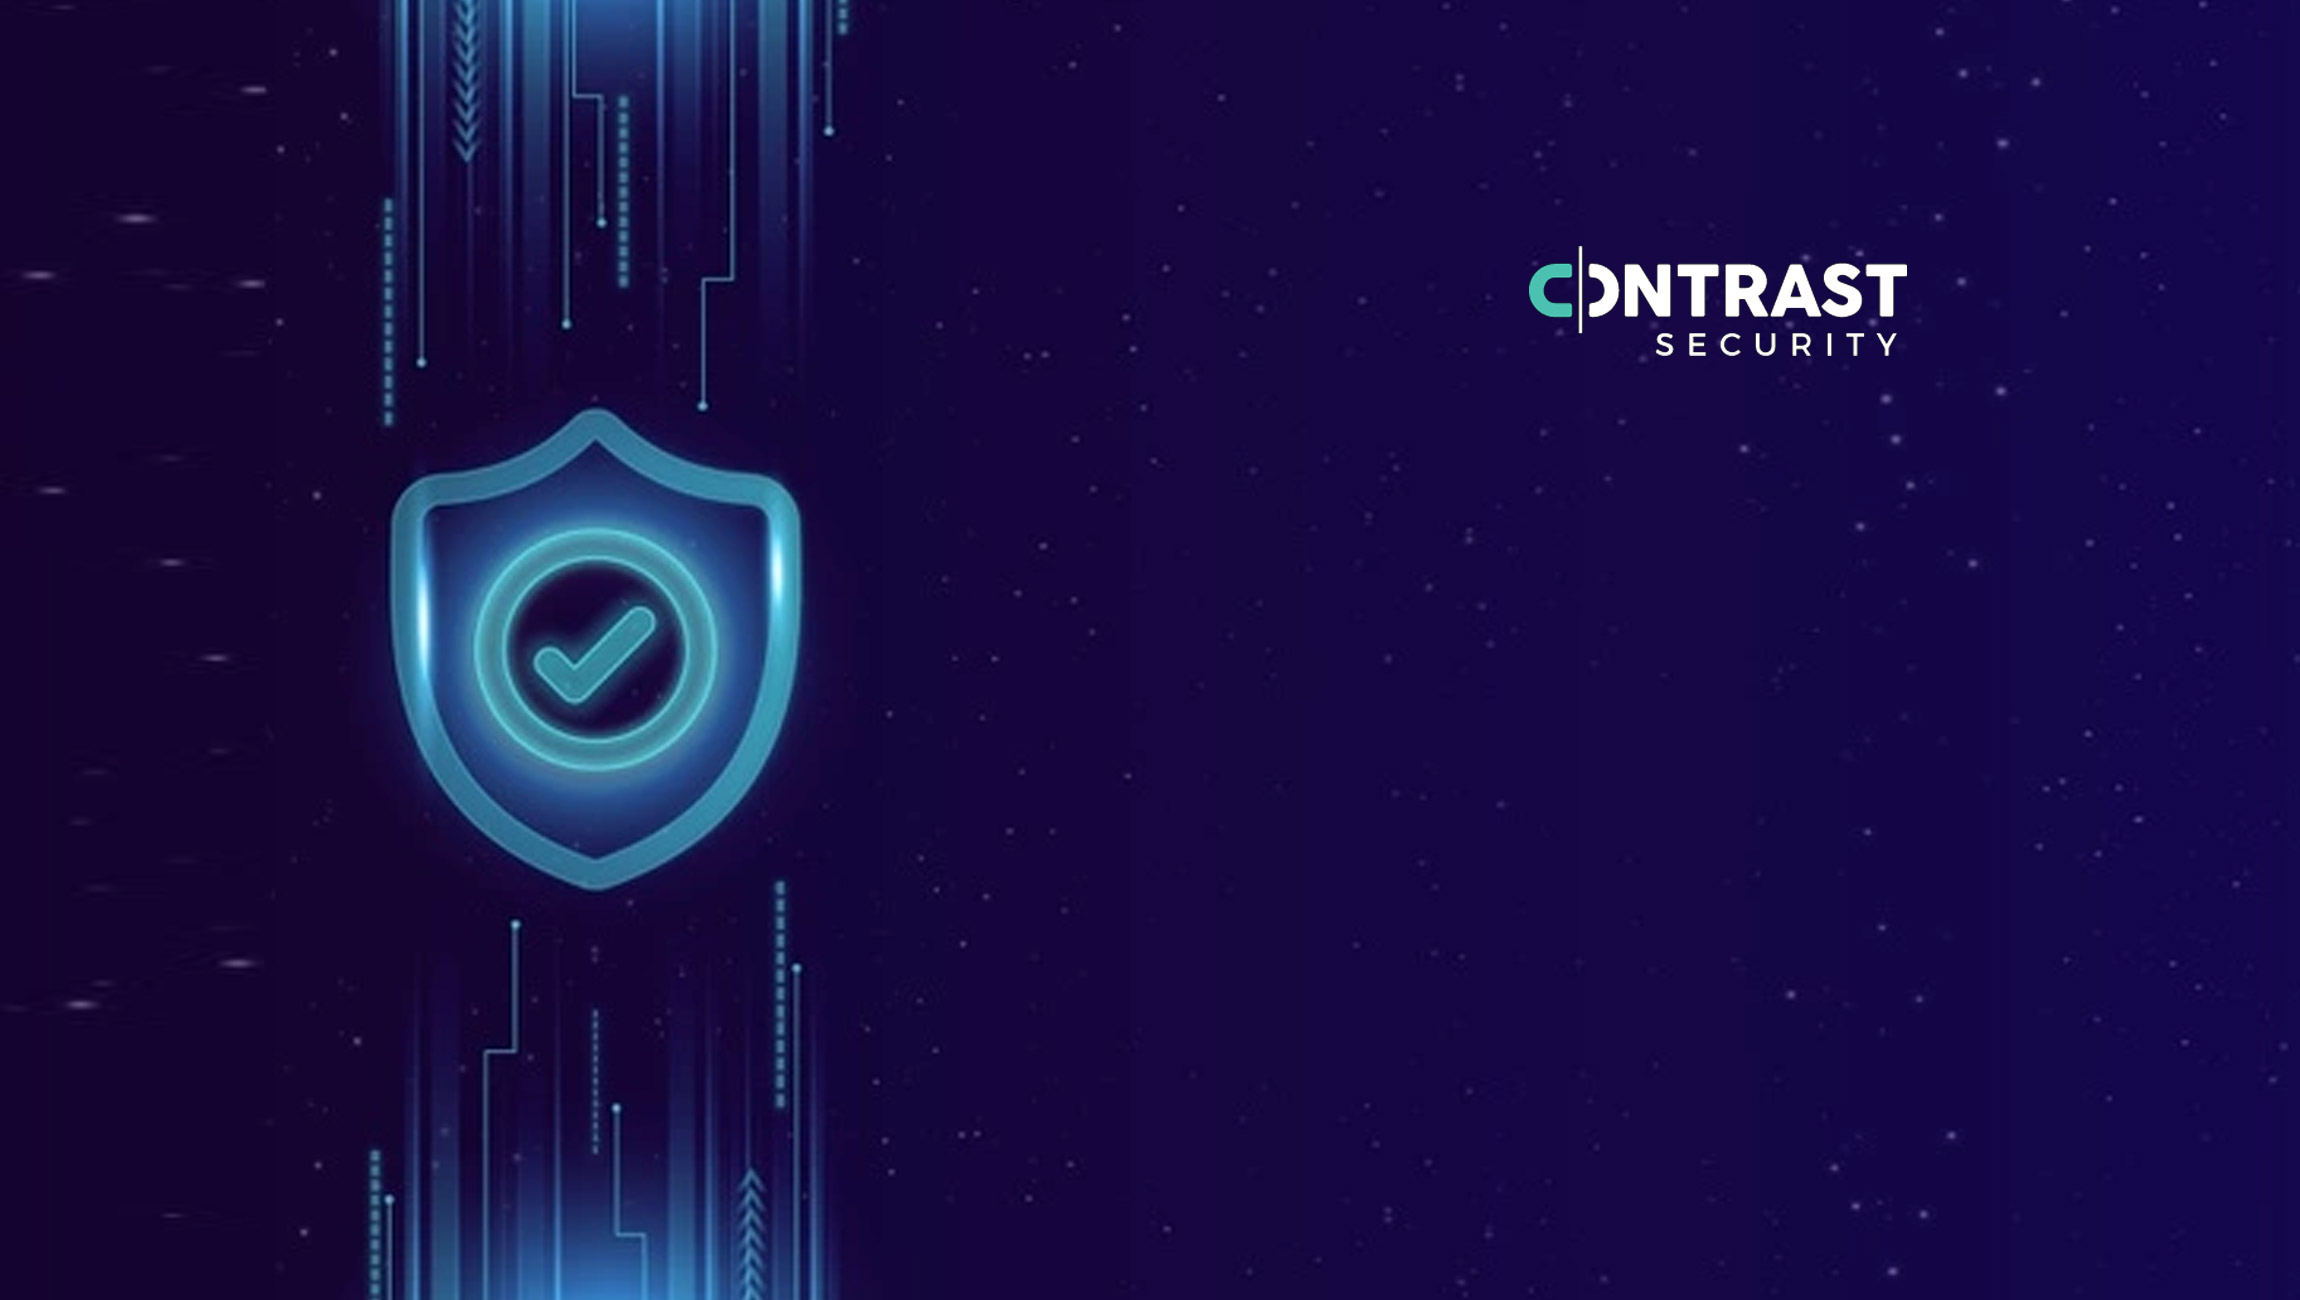 Contrast Security Invests in Executive Leadership to Drive Innovation, Strengthen Customer Success